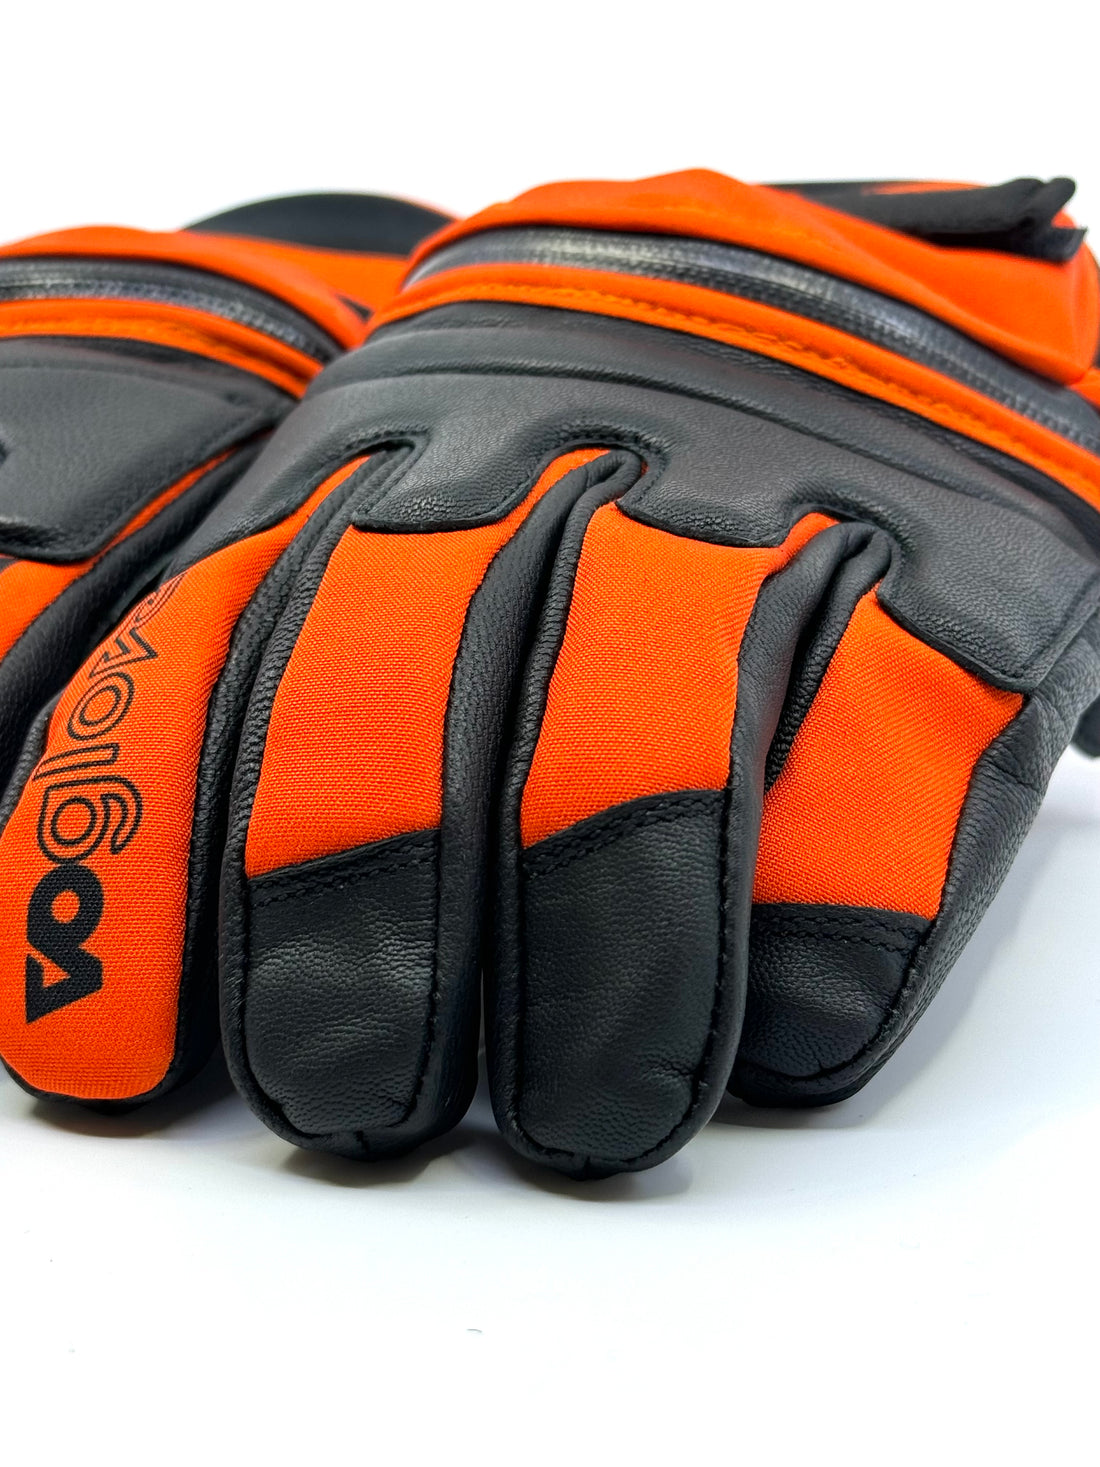 NEW! Orange and Black Extra Thin Palm Knuckle Pad Gloves – VO Gloves